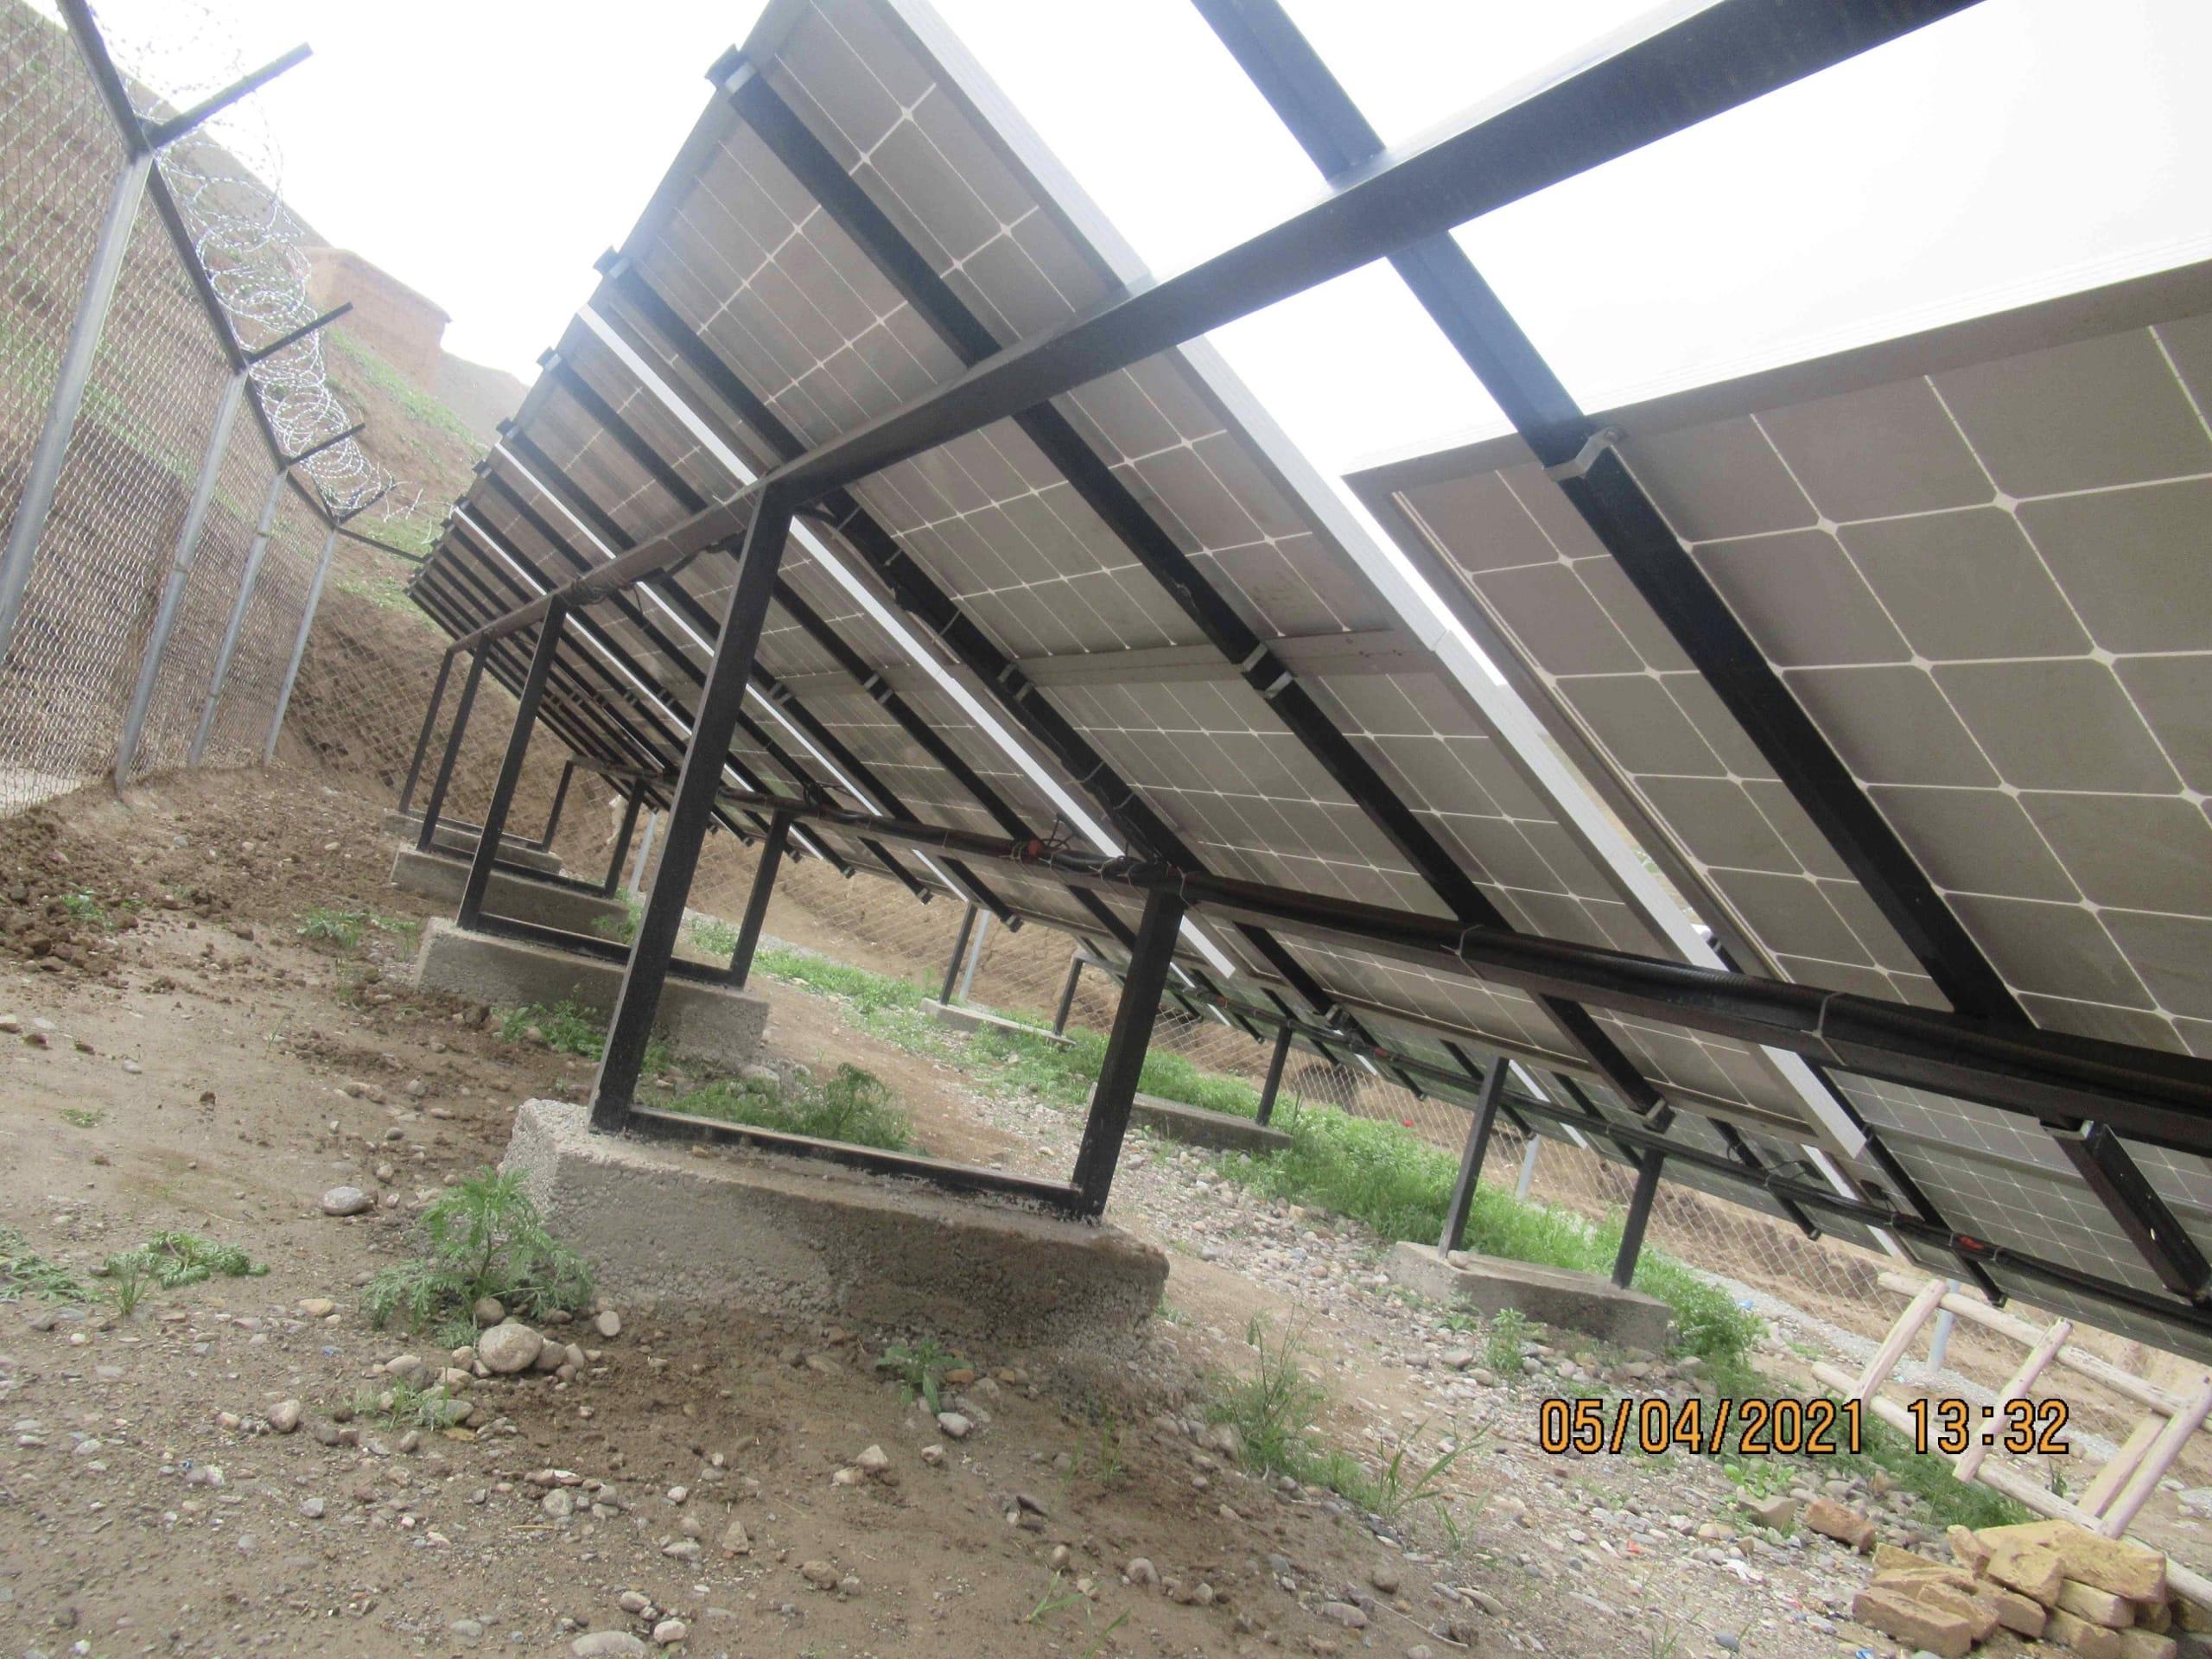 Ground-mounted structure placed in concrete and no cables visible - perfect installation of this PV plant.